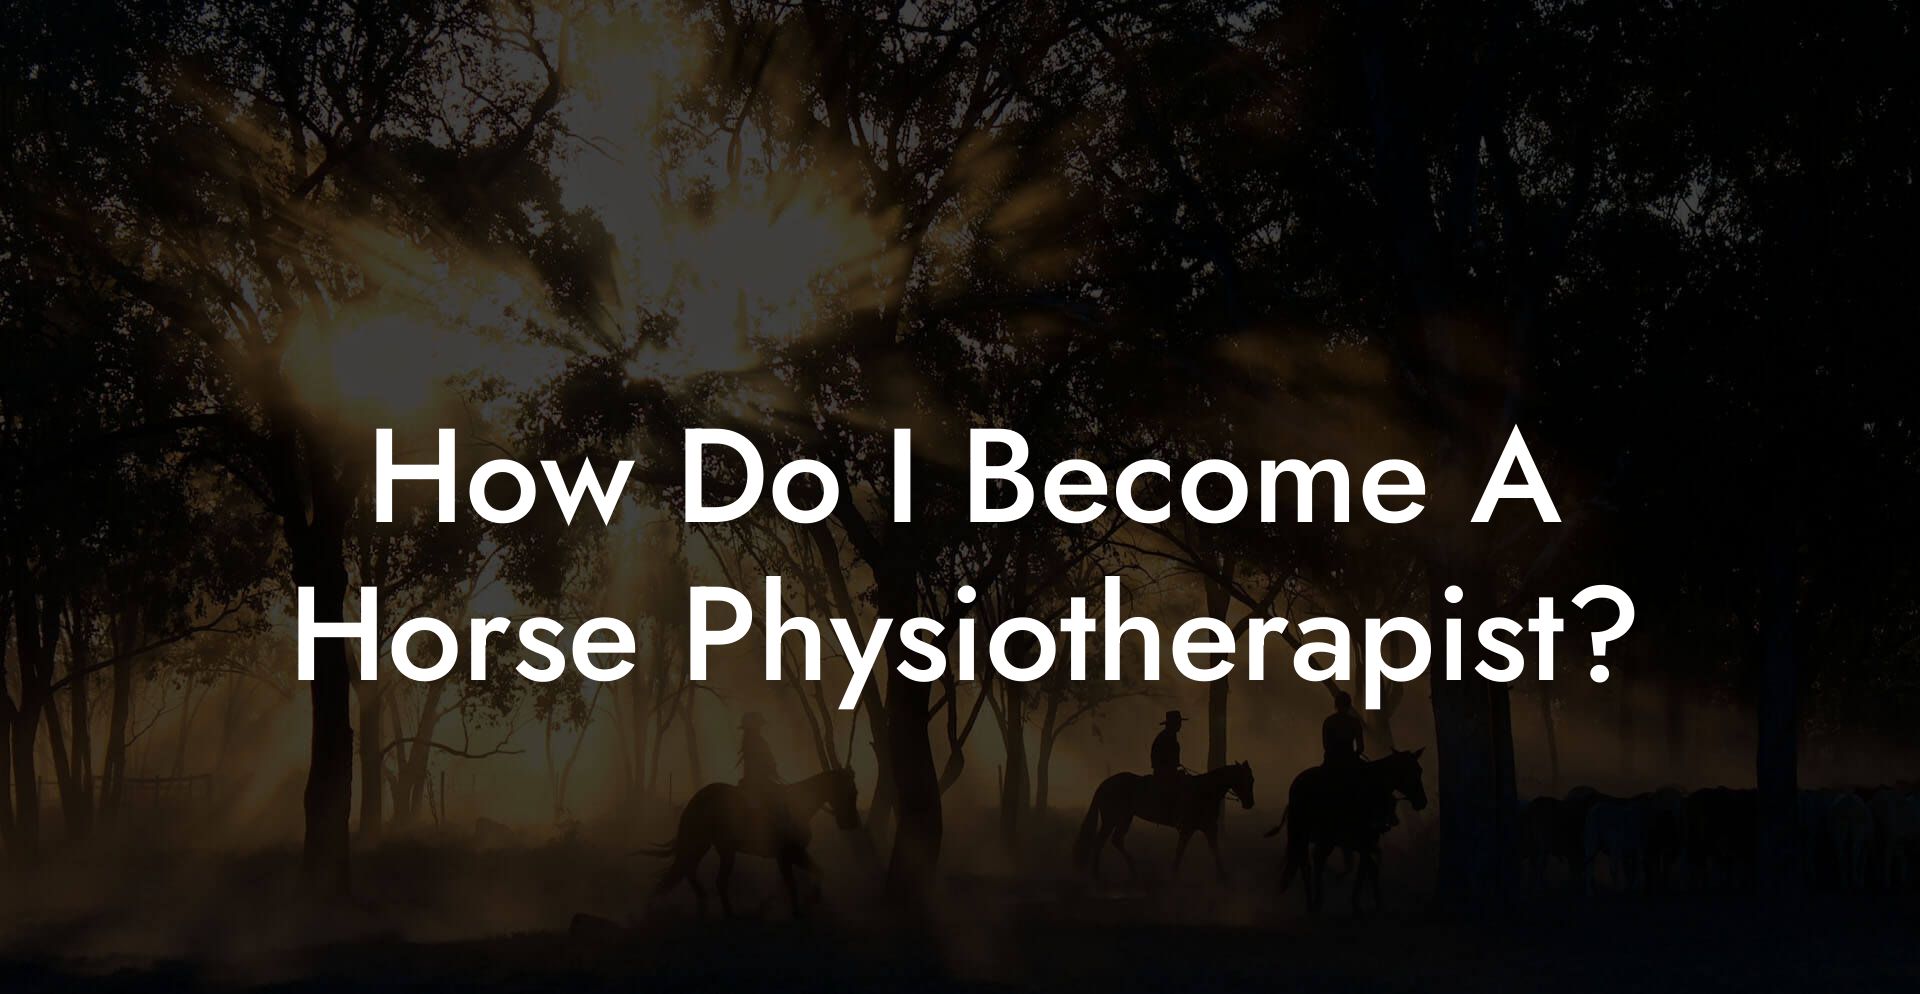 How Do I Become A Horse Physiotherapist?